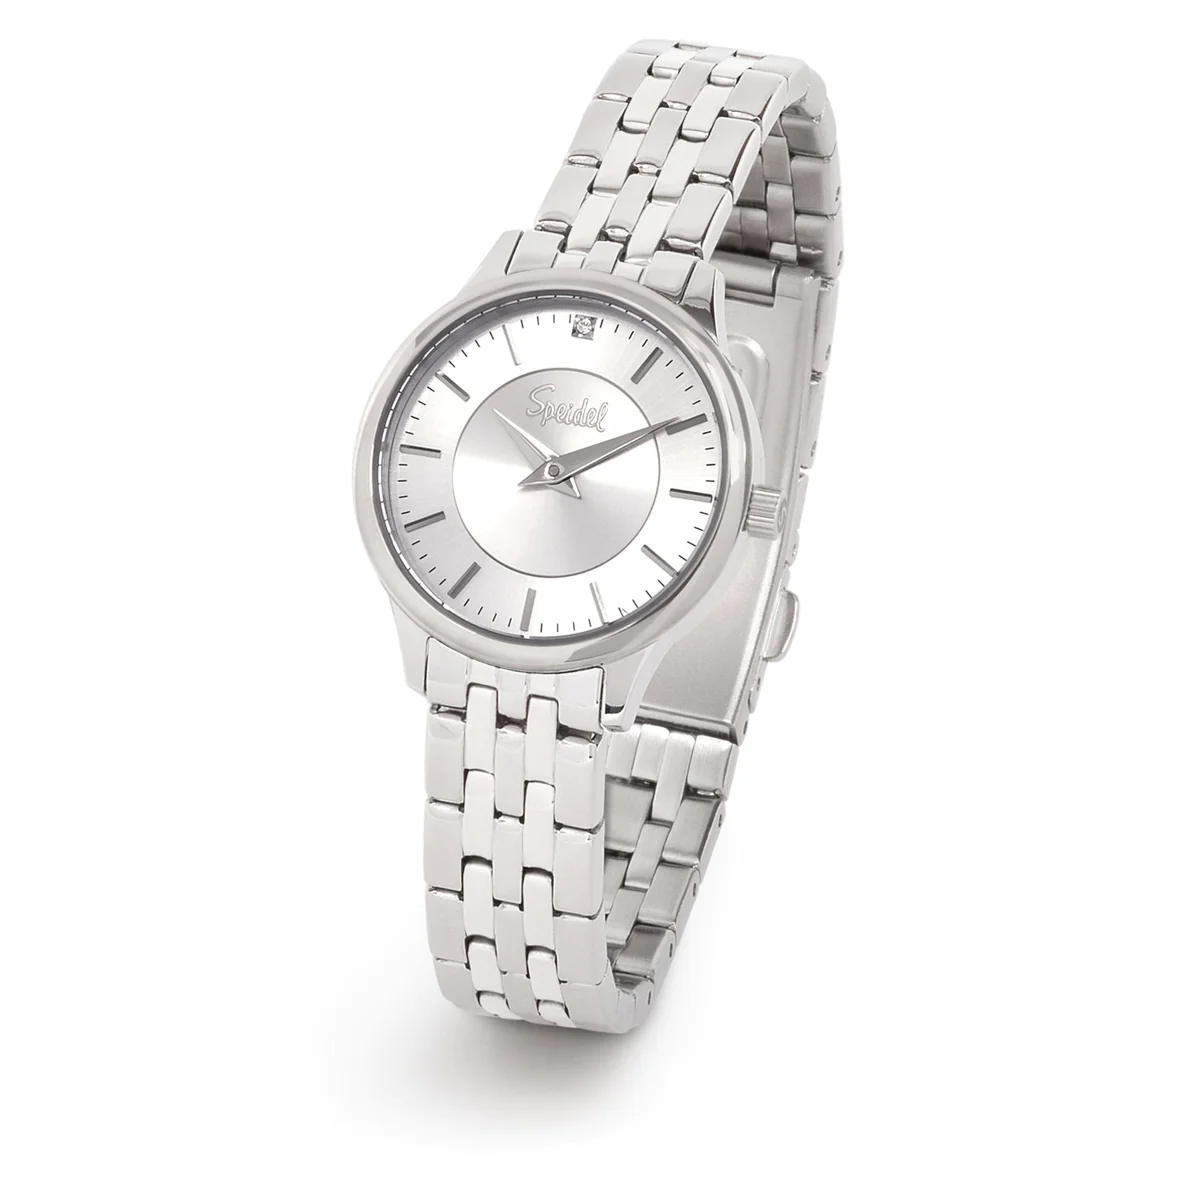 Ladies Stainless Steel Speidel Watch with Sunray Dial #510-00102